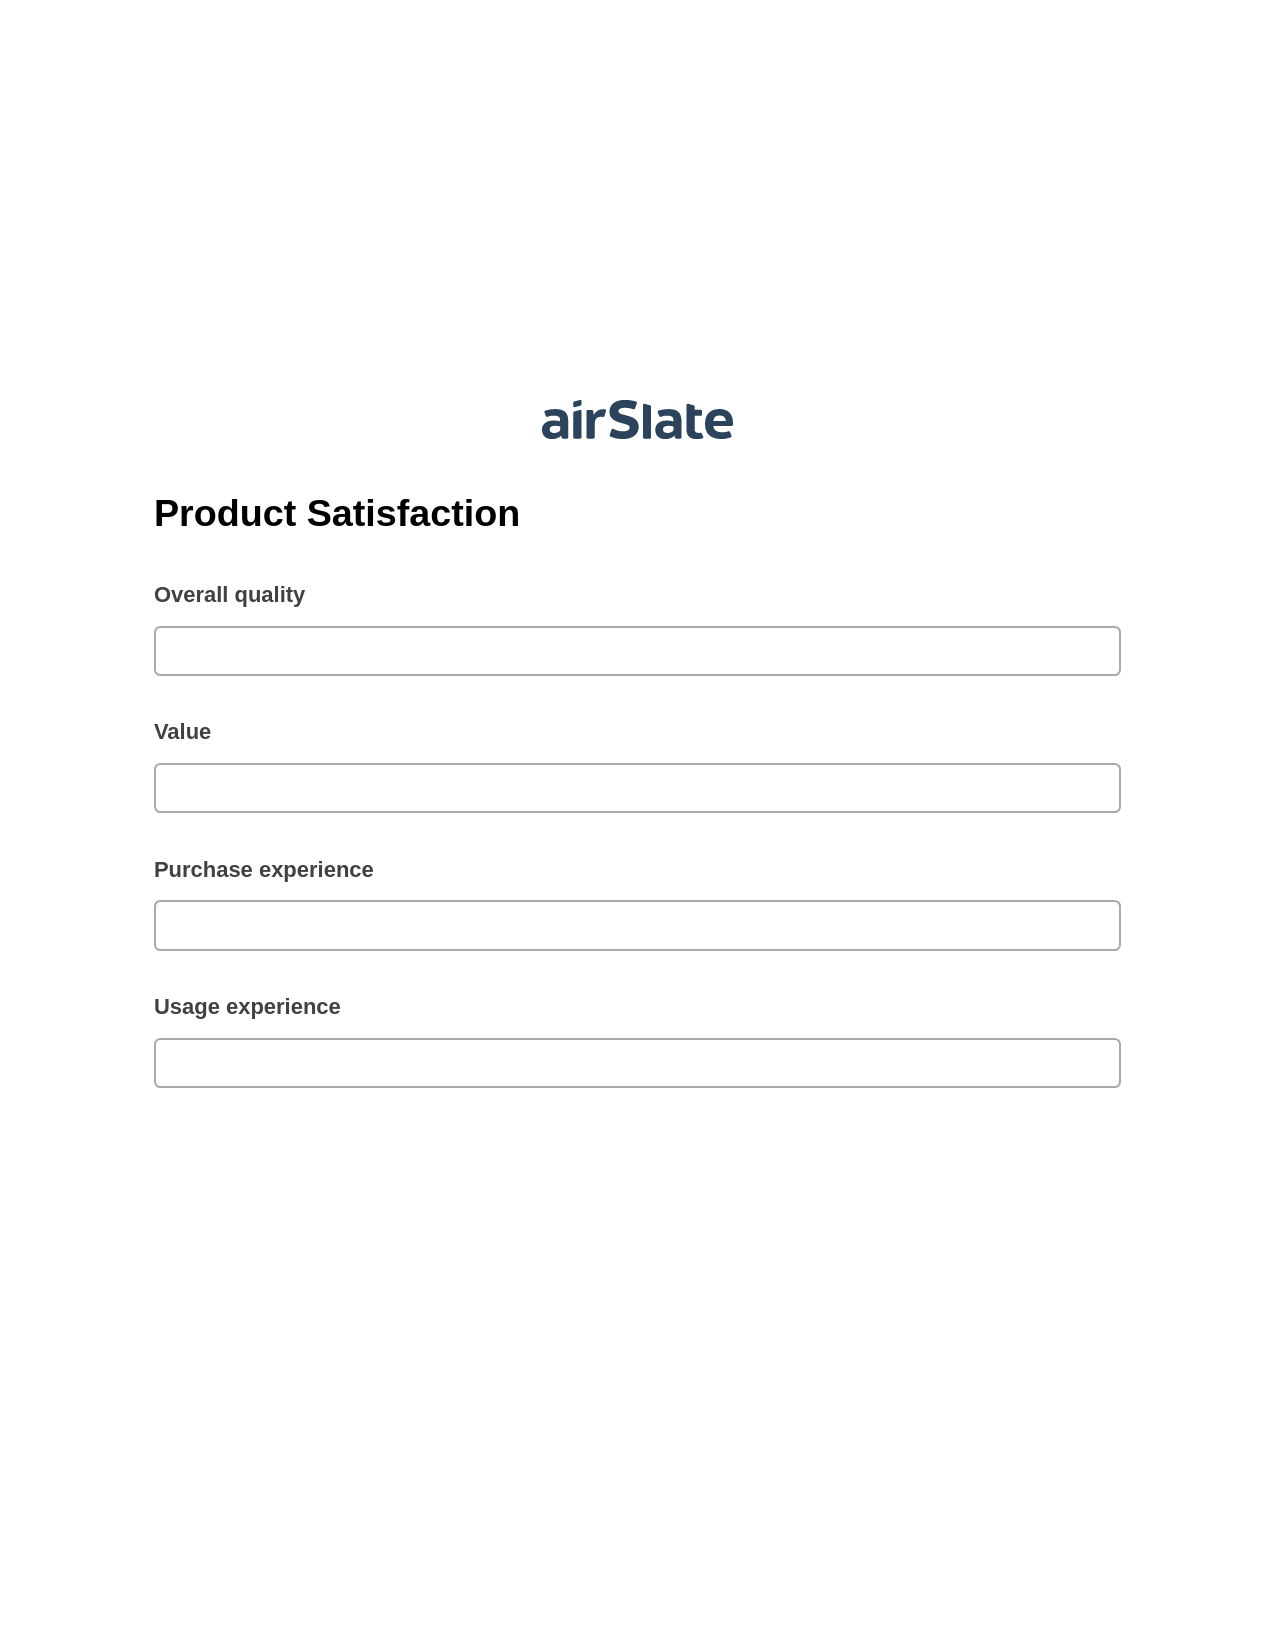 Multirole Product Satisfaction Pre-fill Slate from MS Dynamics 365 Records Bot, Create MS Dynamics 365 Records Bot, Export to Smartsheet